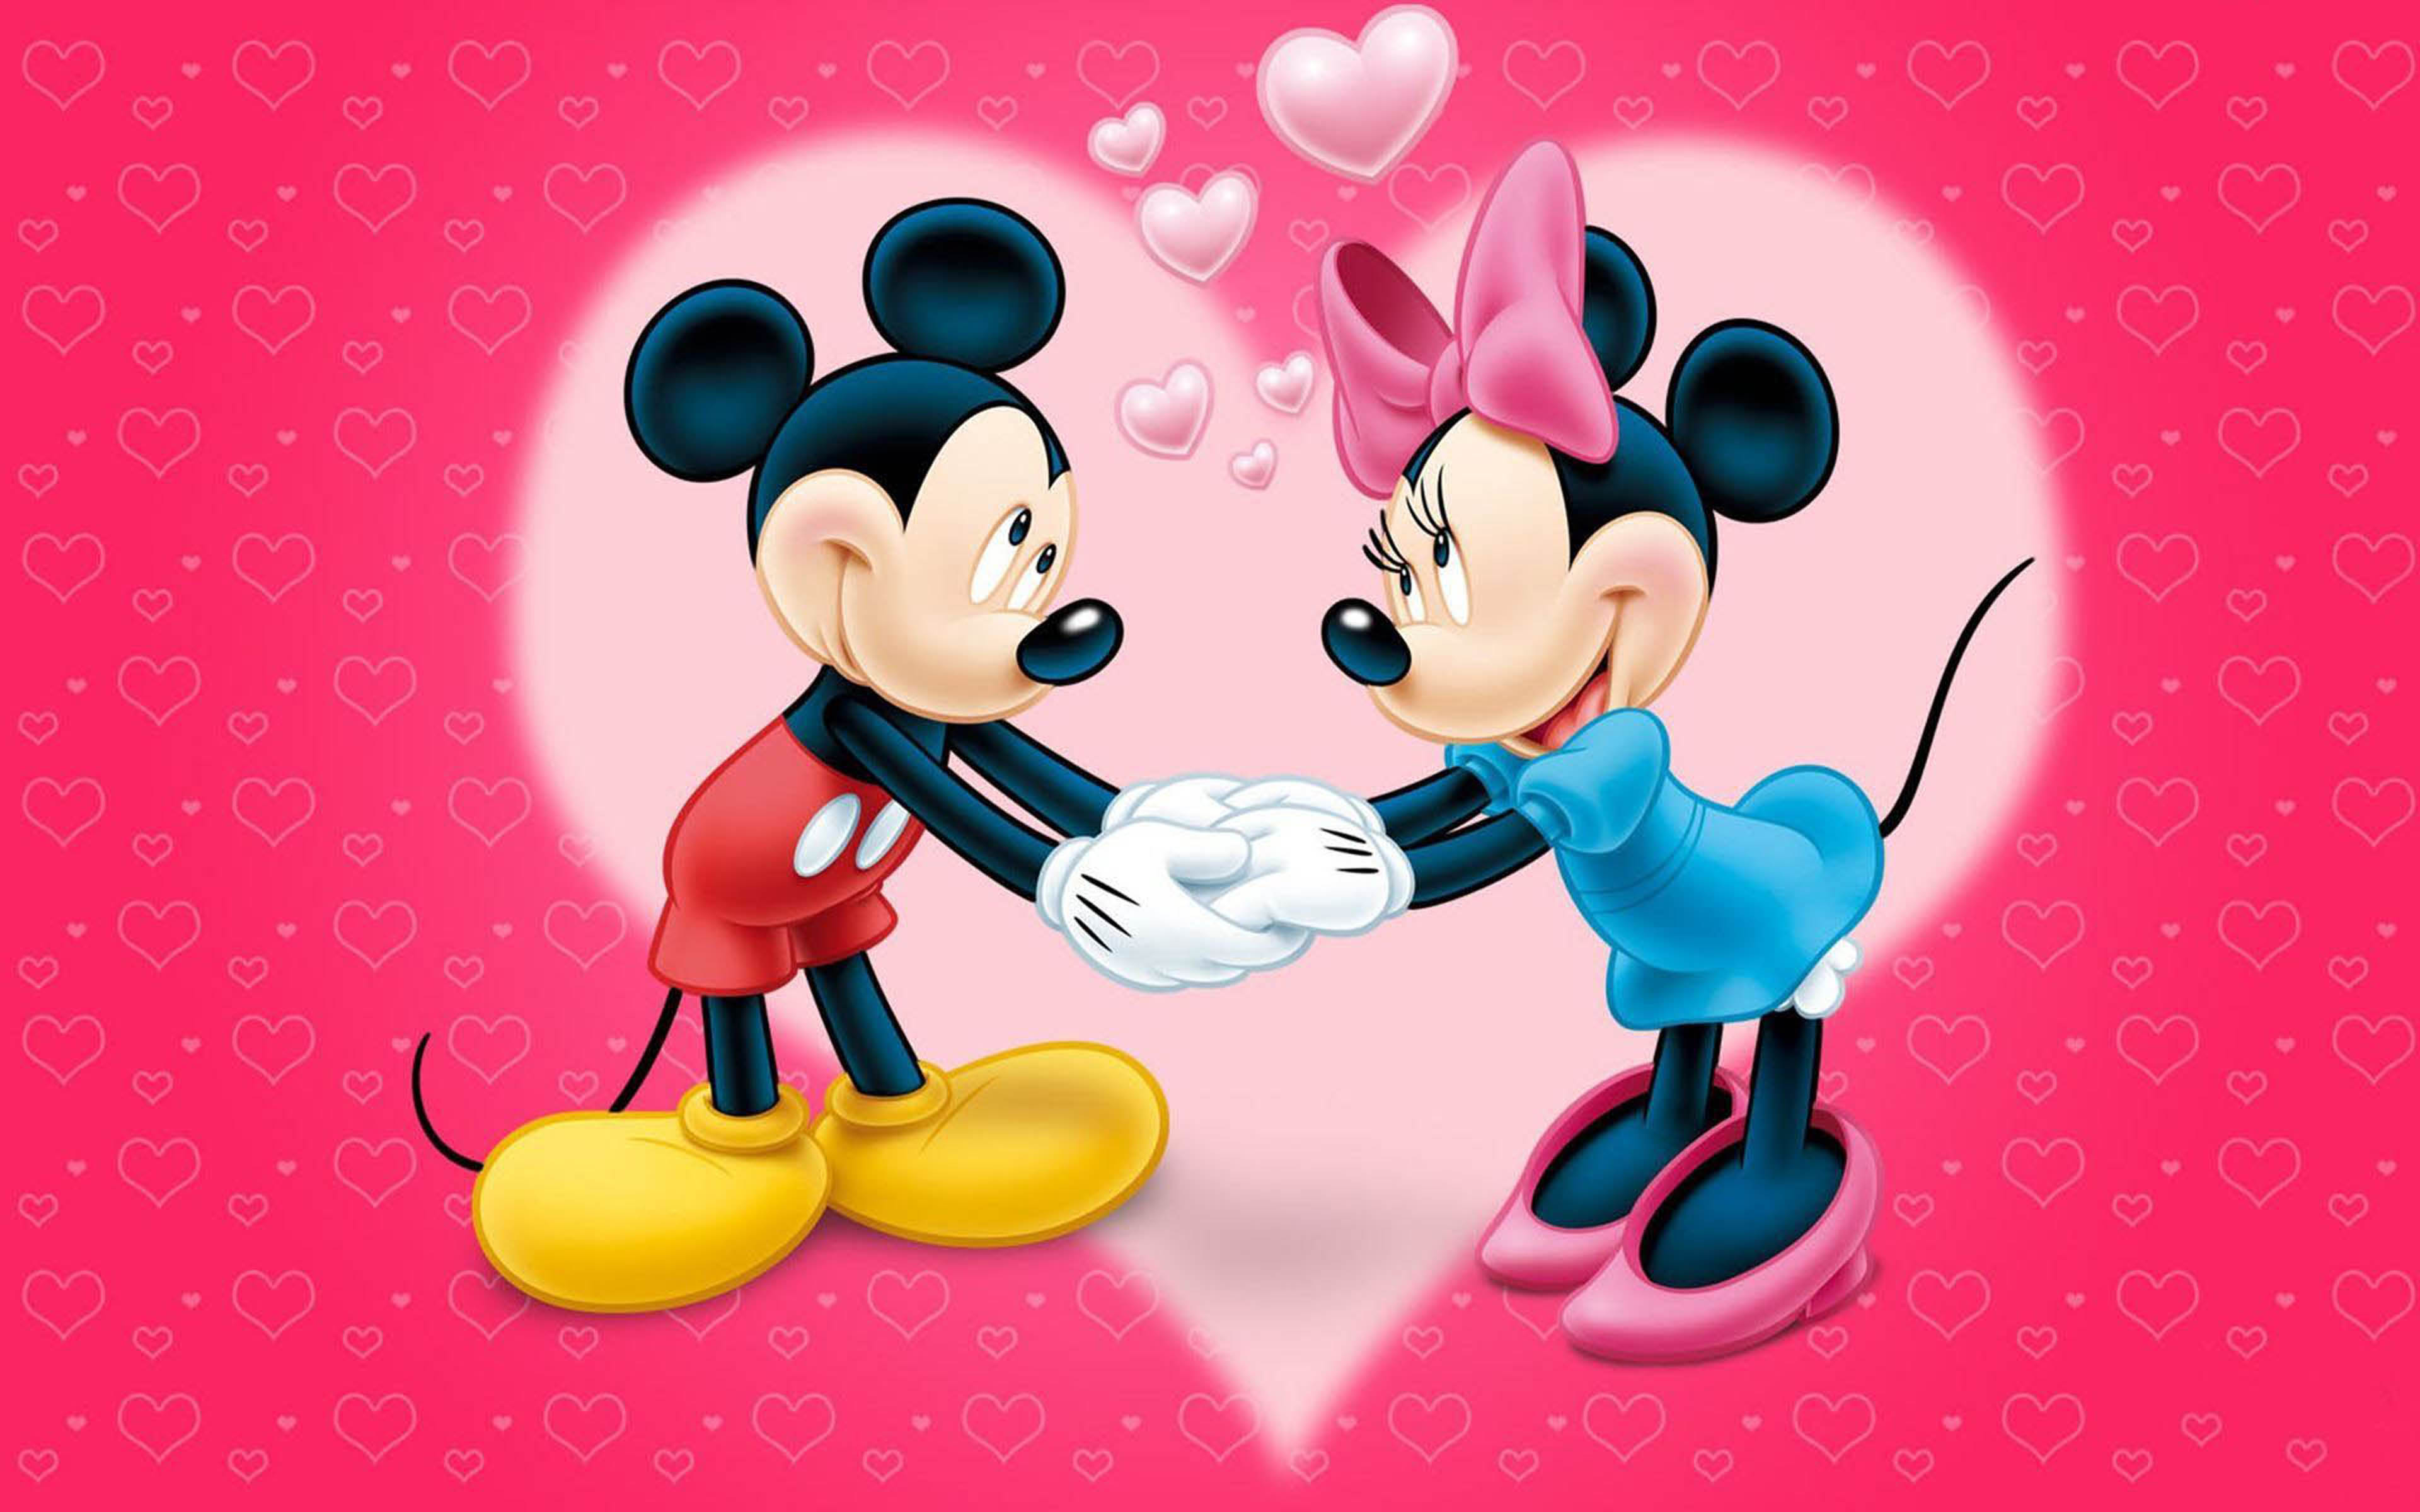 Mickey And Minnie Mouse Love Couple Cartoon Red Wallpaper With Hearts Hd Wallpaper For Desktop Mobile And Tablet 3840x2400 Wallpapers13 Com